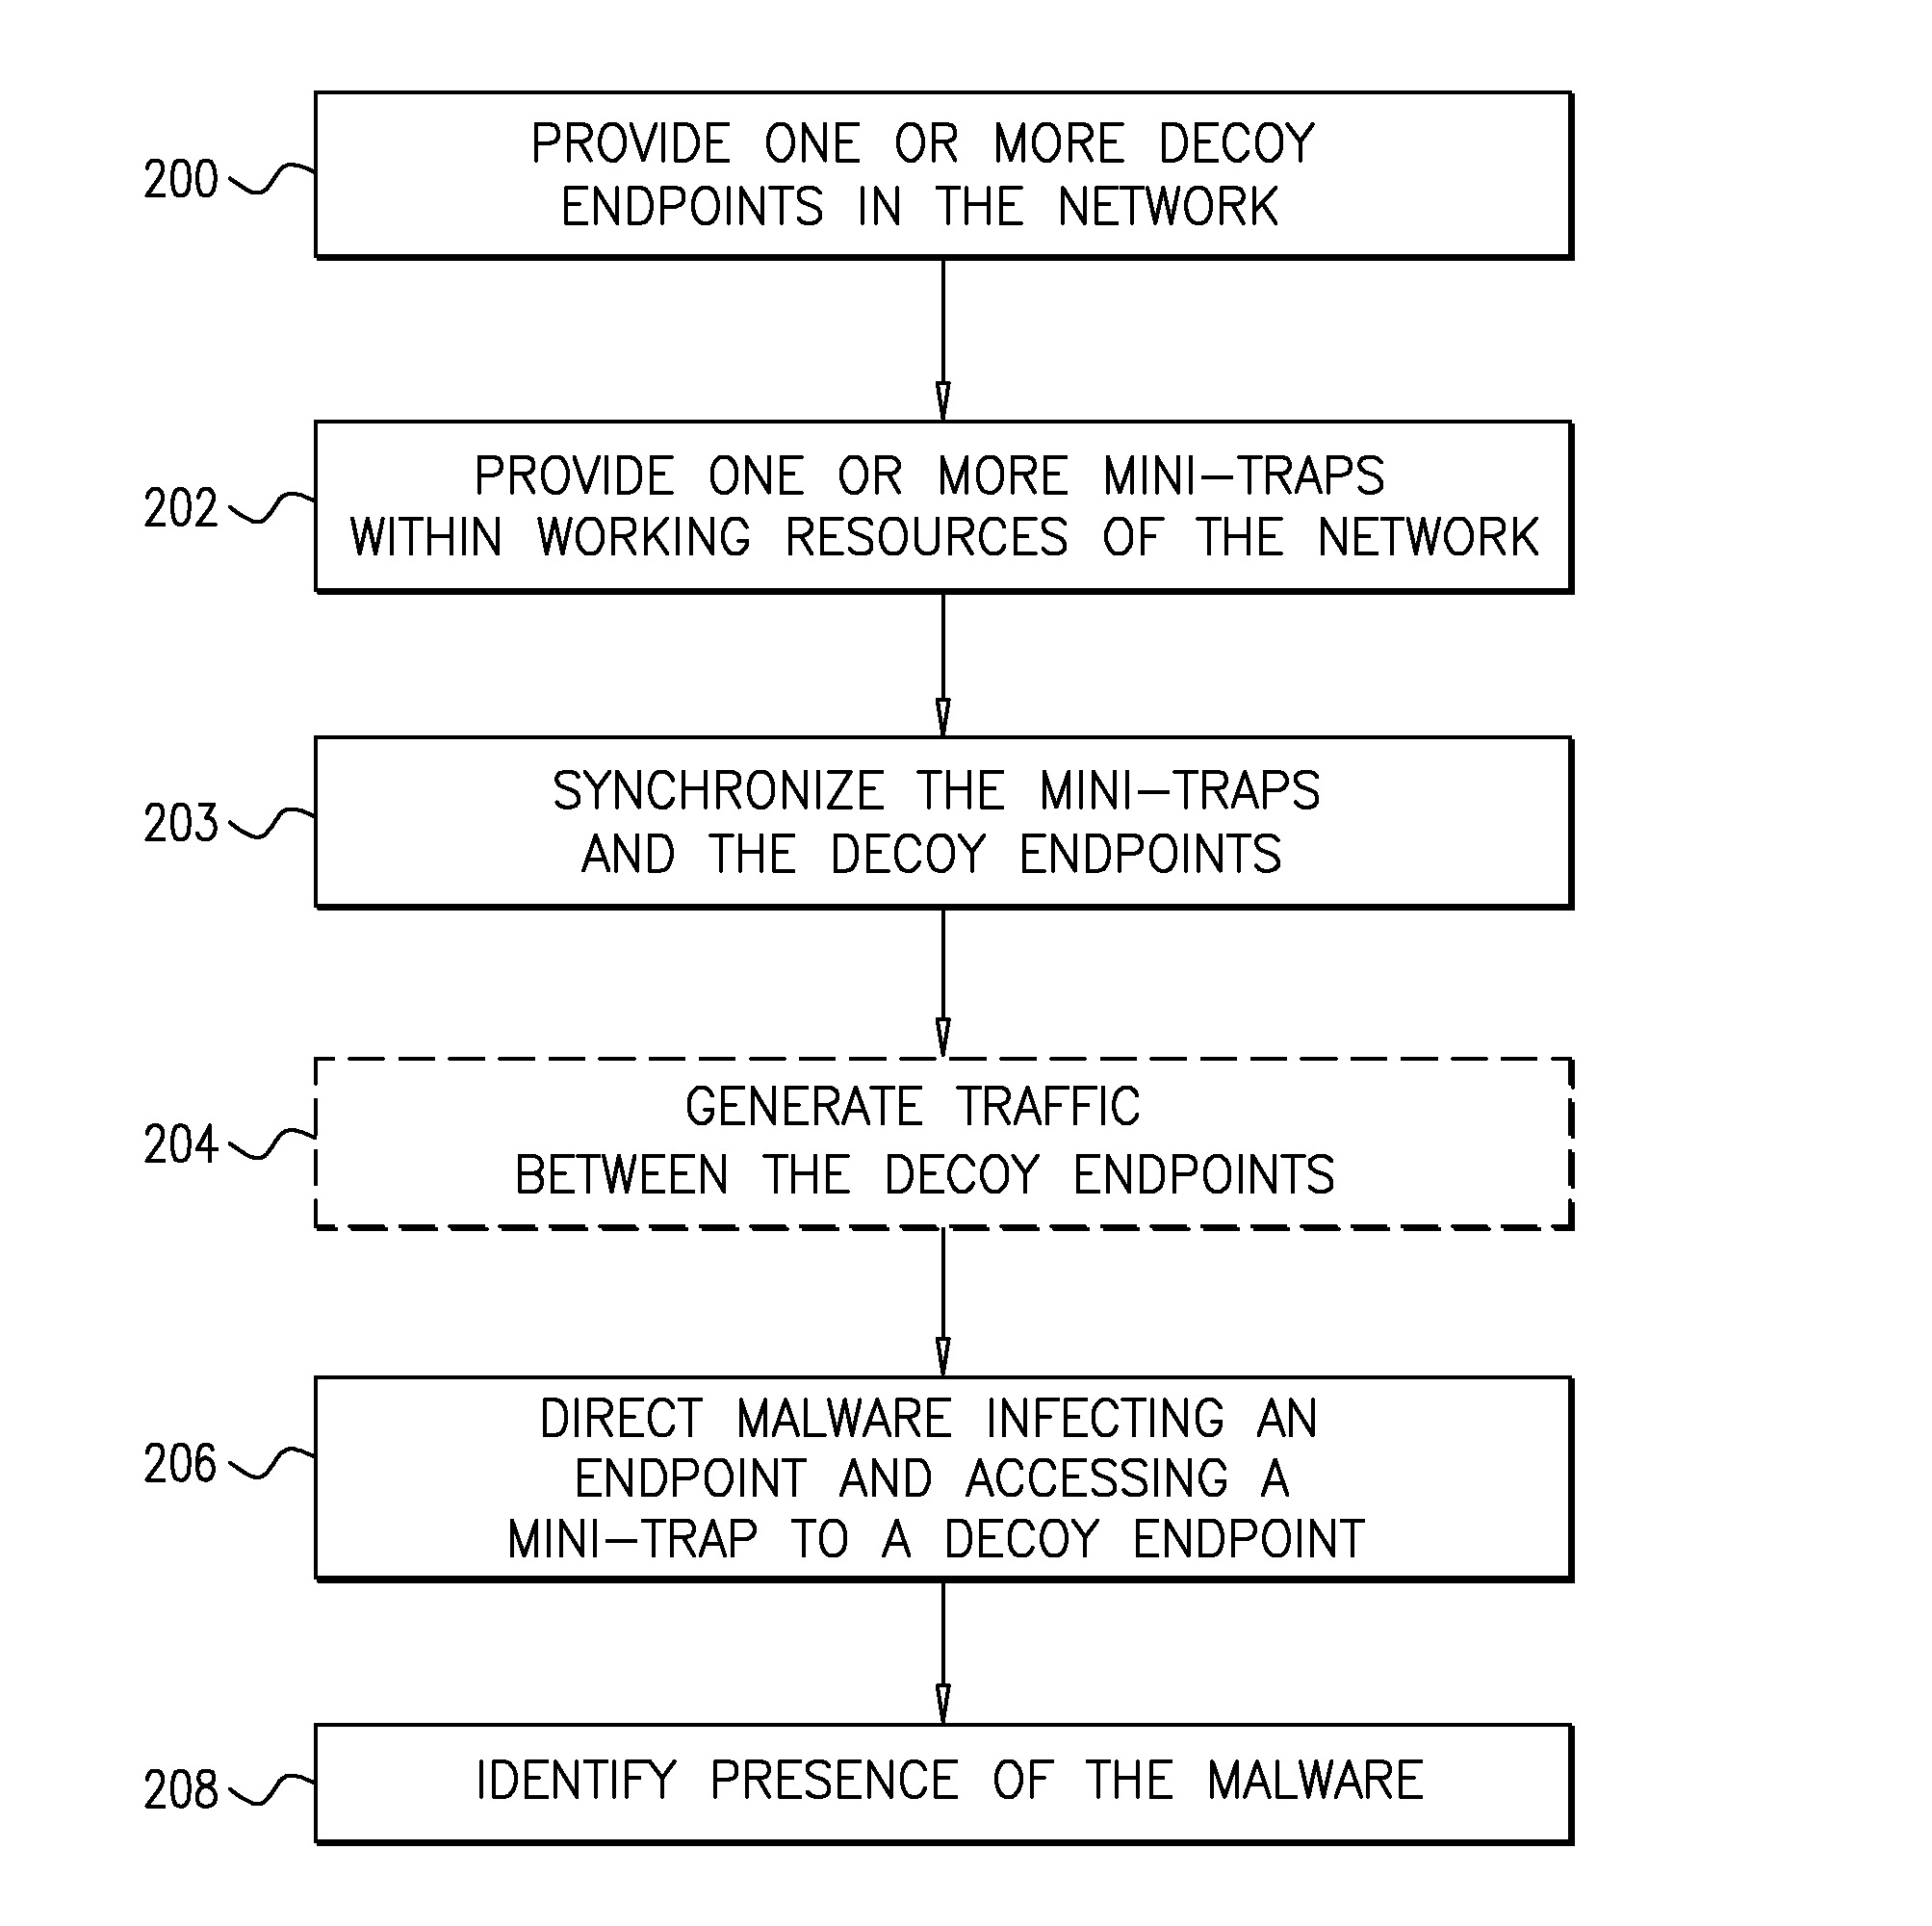 System and a Method for Identifying the Presence of Malware Using Mini-Traps Set At Network Endpoints